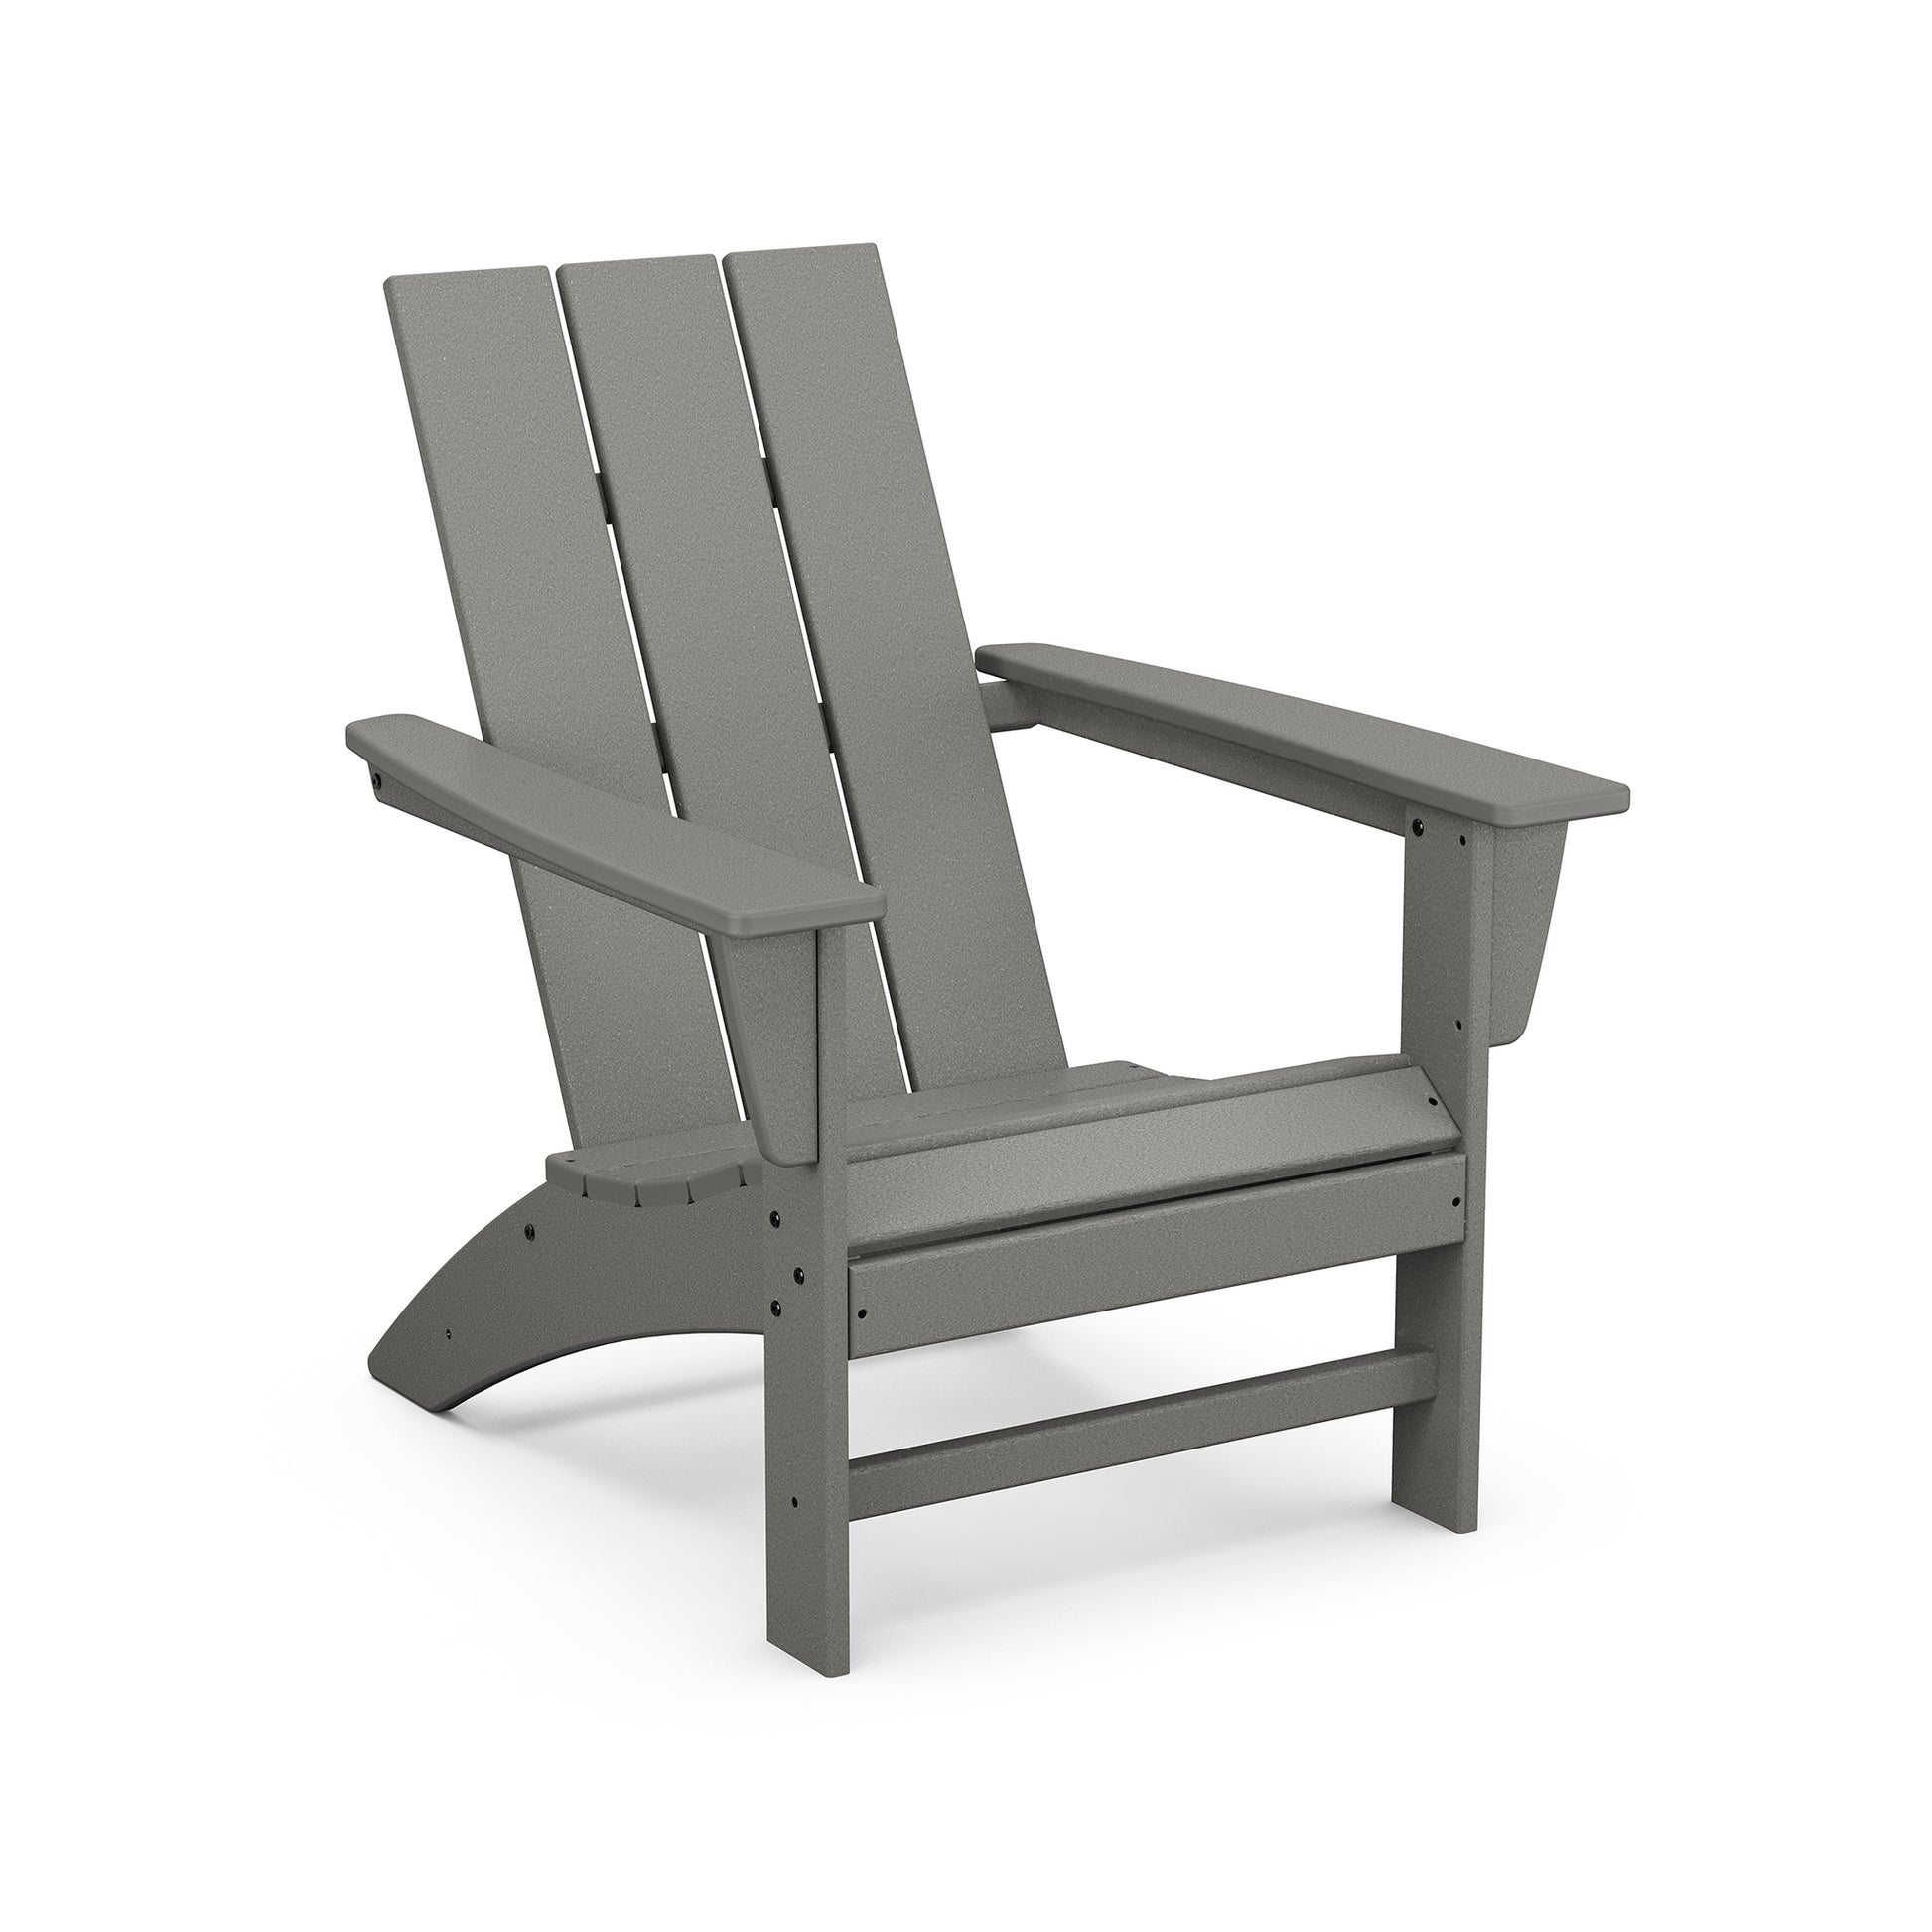 A gray POLYWOOD Modern Adirondack Chair on a white background.